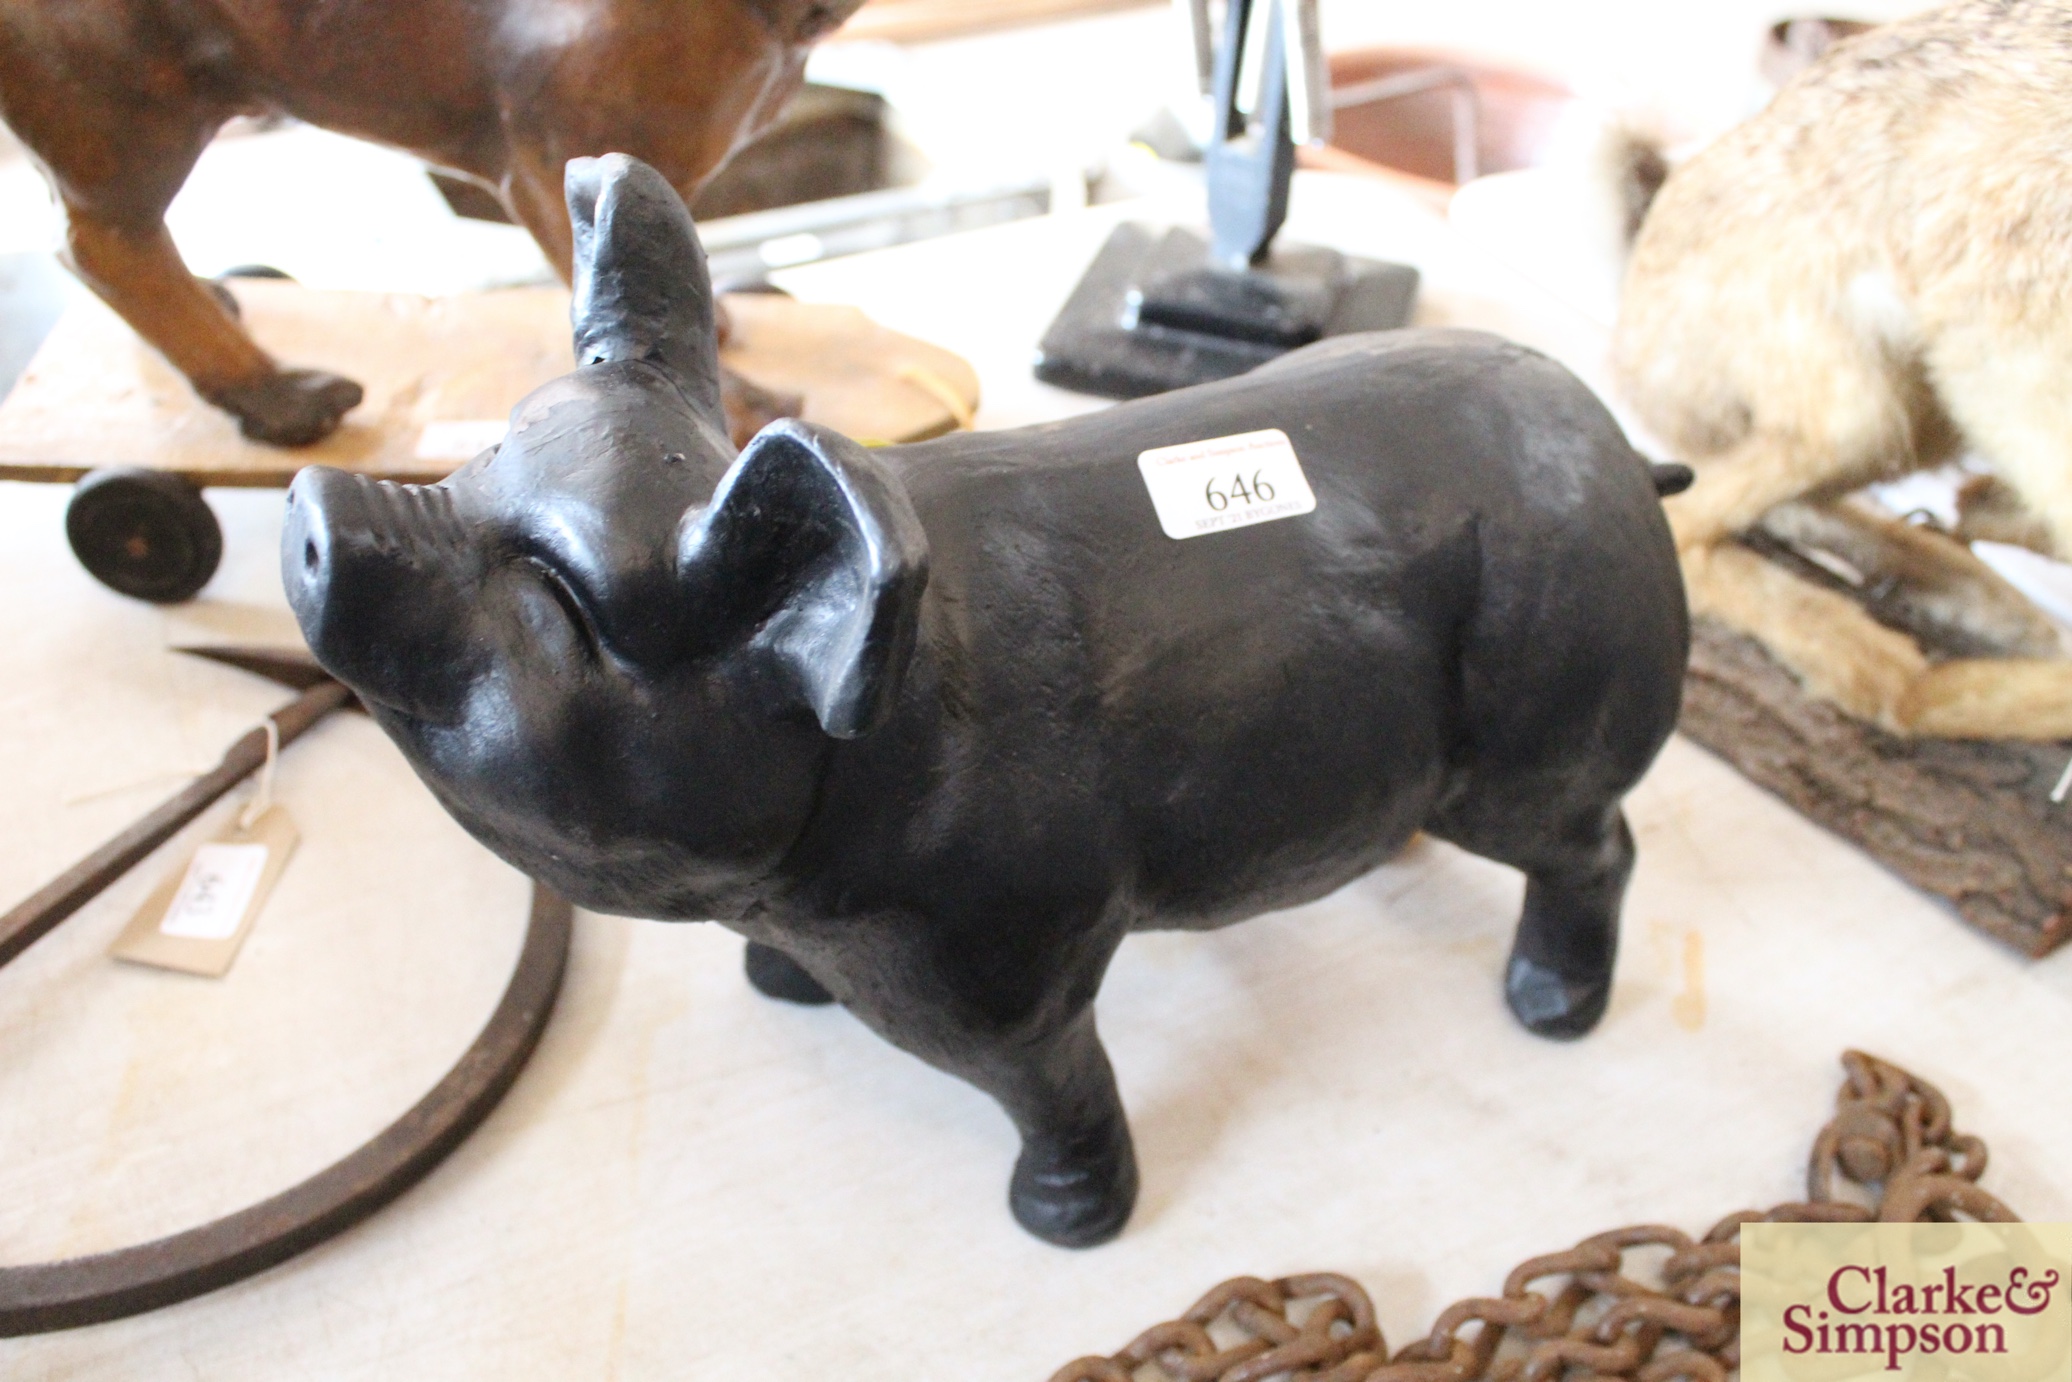 A composition humorous model of a black pig